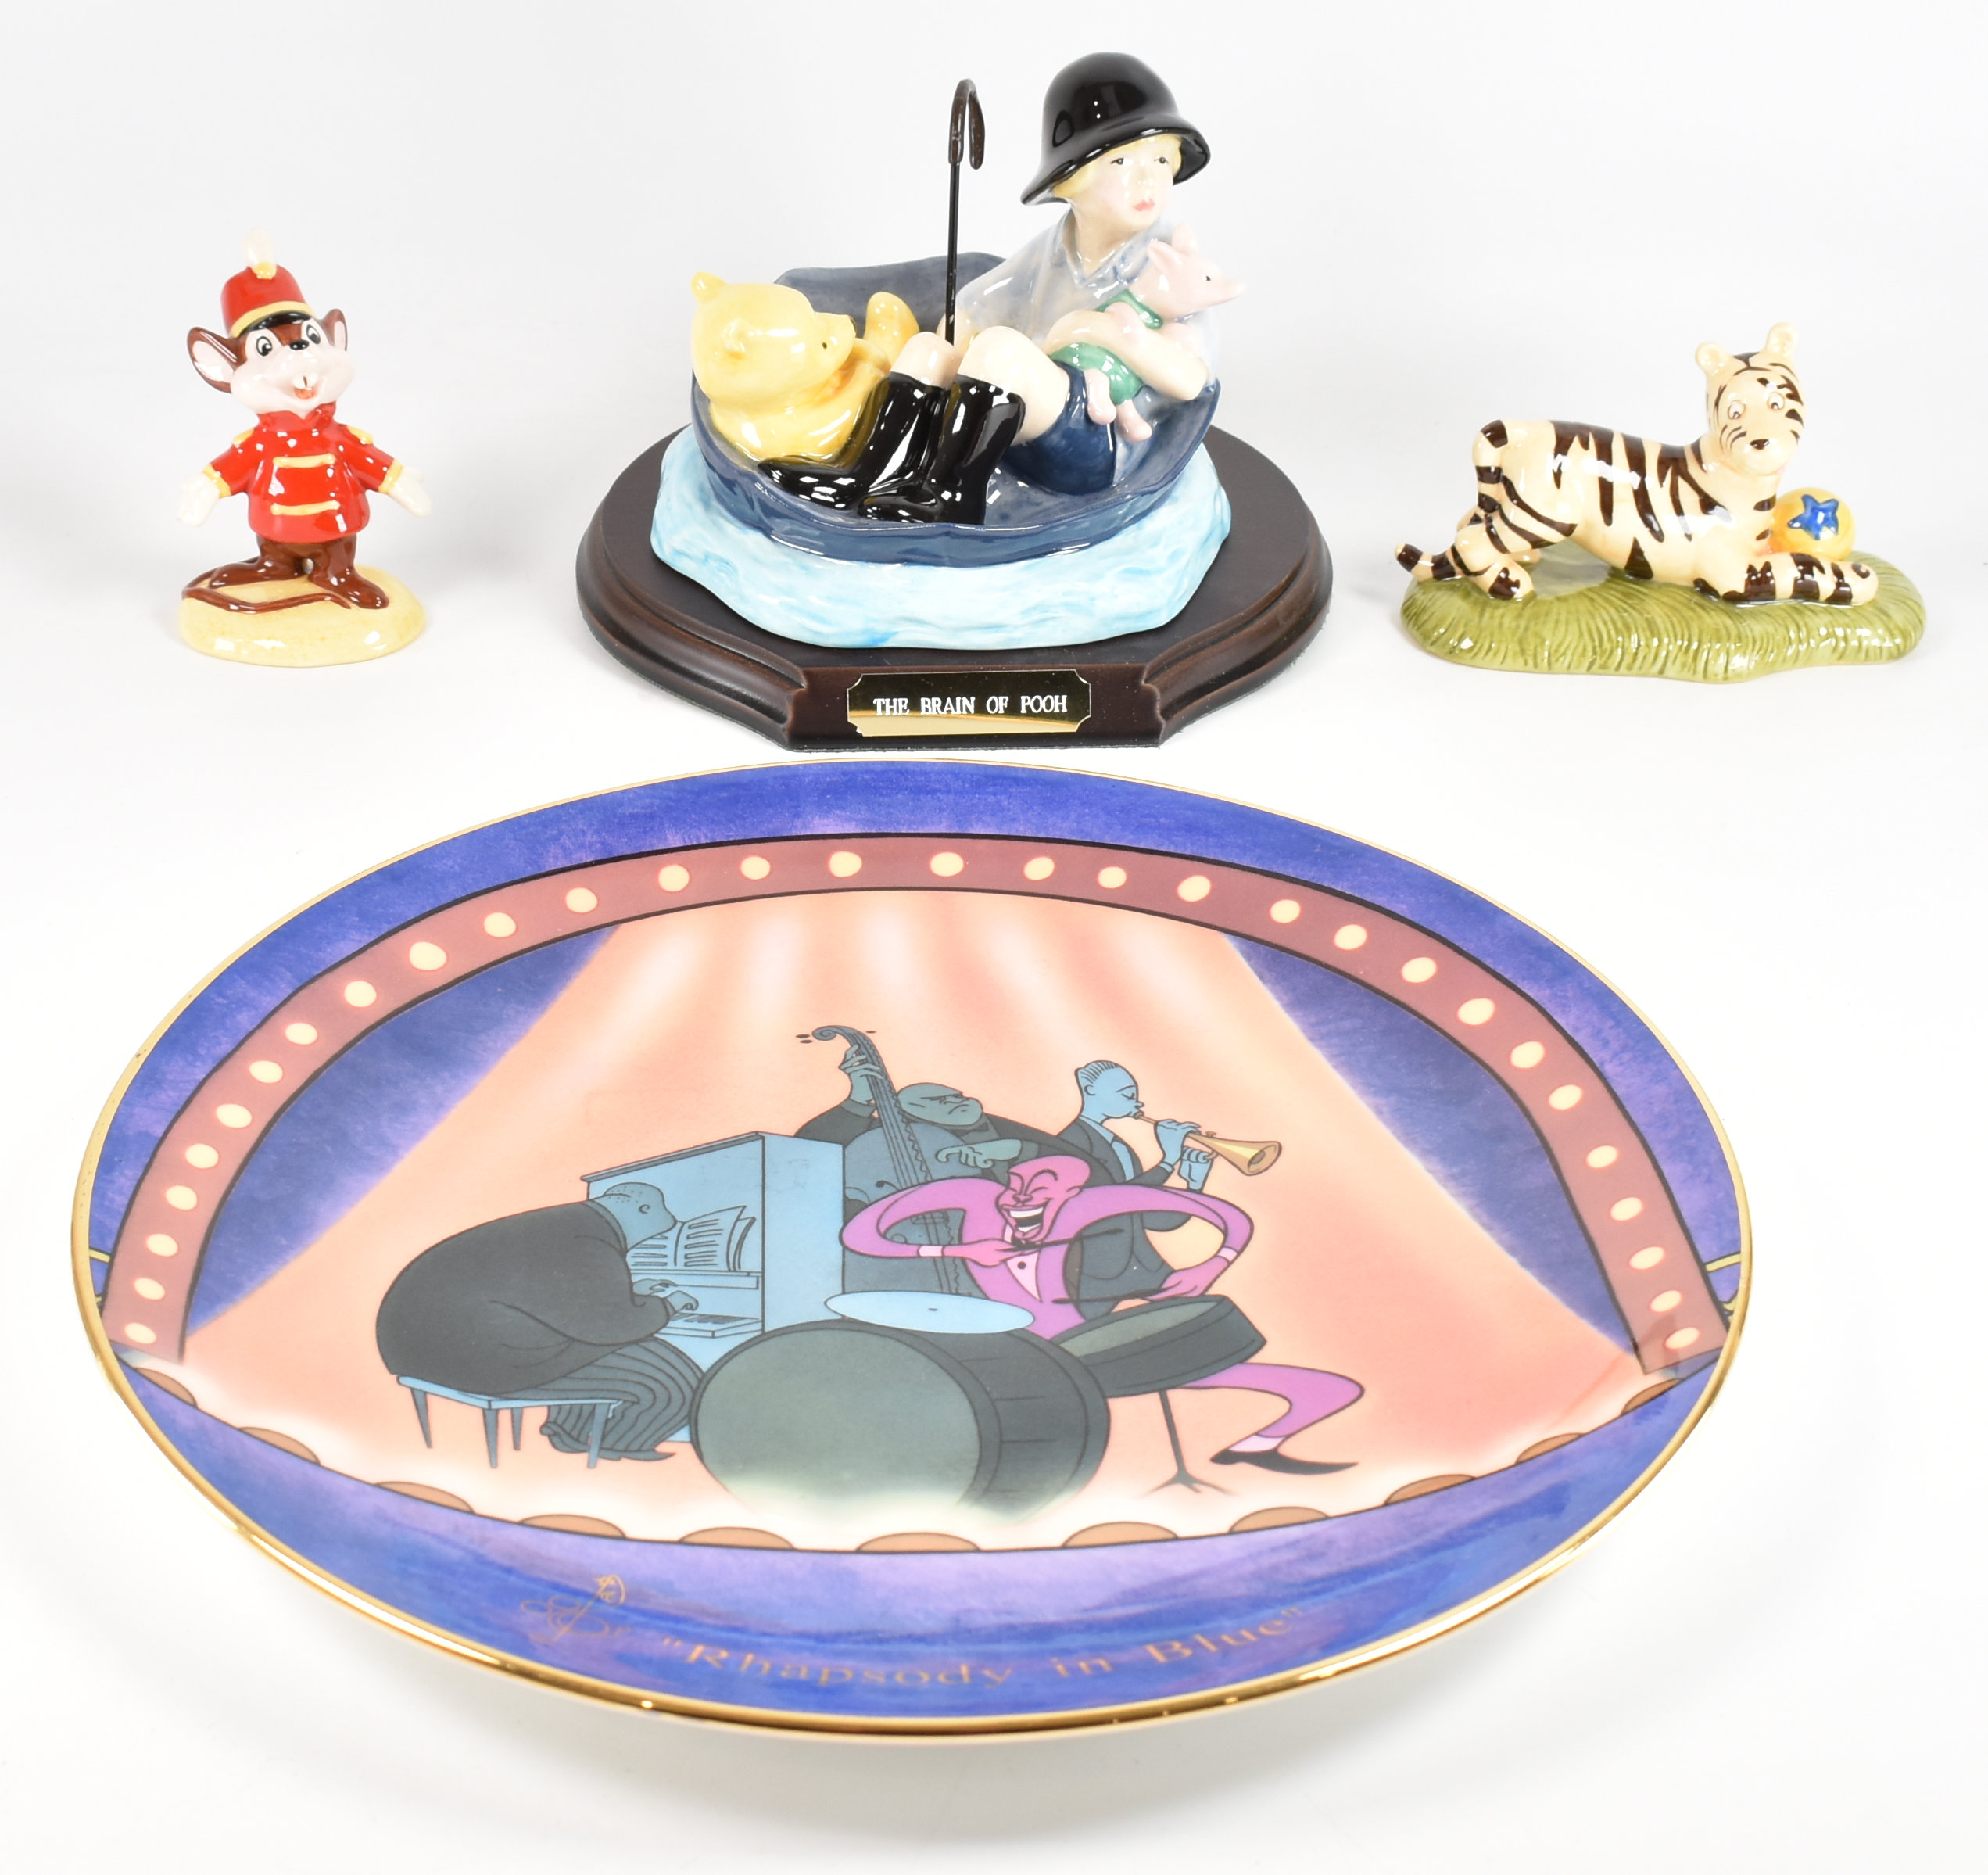 NOS ROYAL DOULTON WINNIE THE POOH & DISNEY COLLECTIONS ITEMS - Image 2 of 8